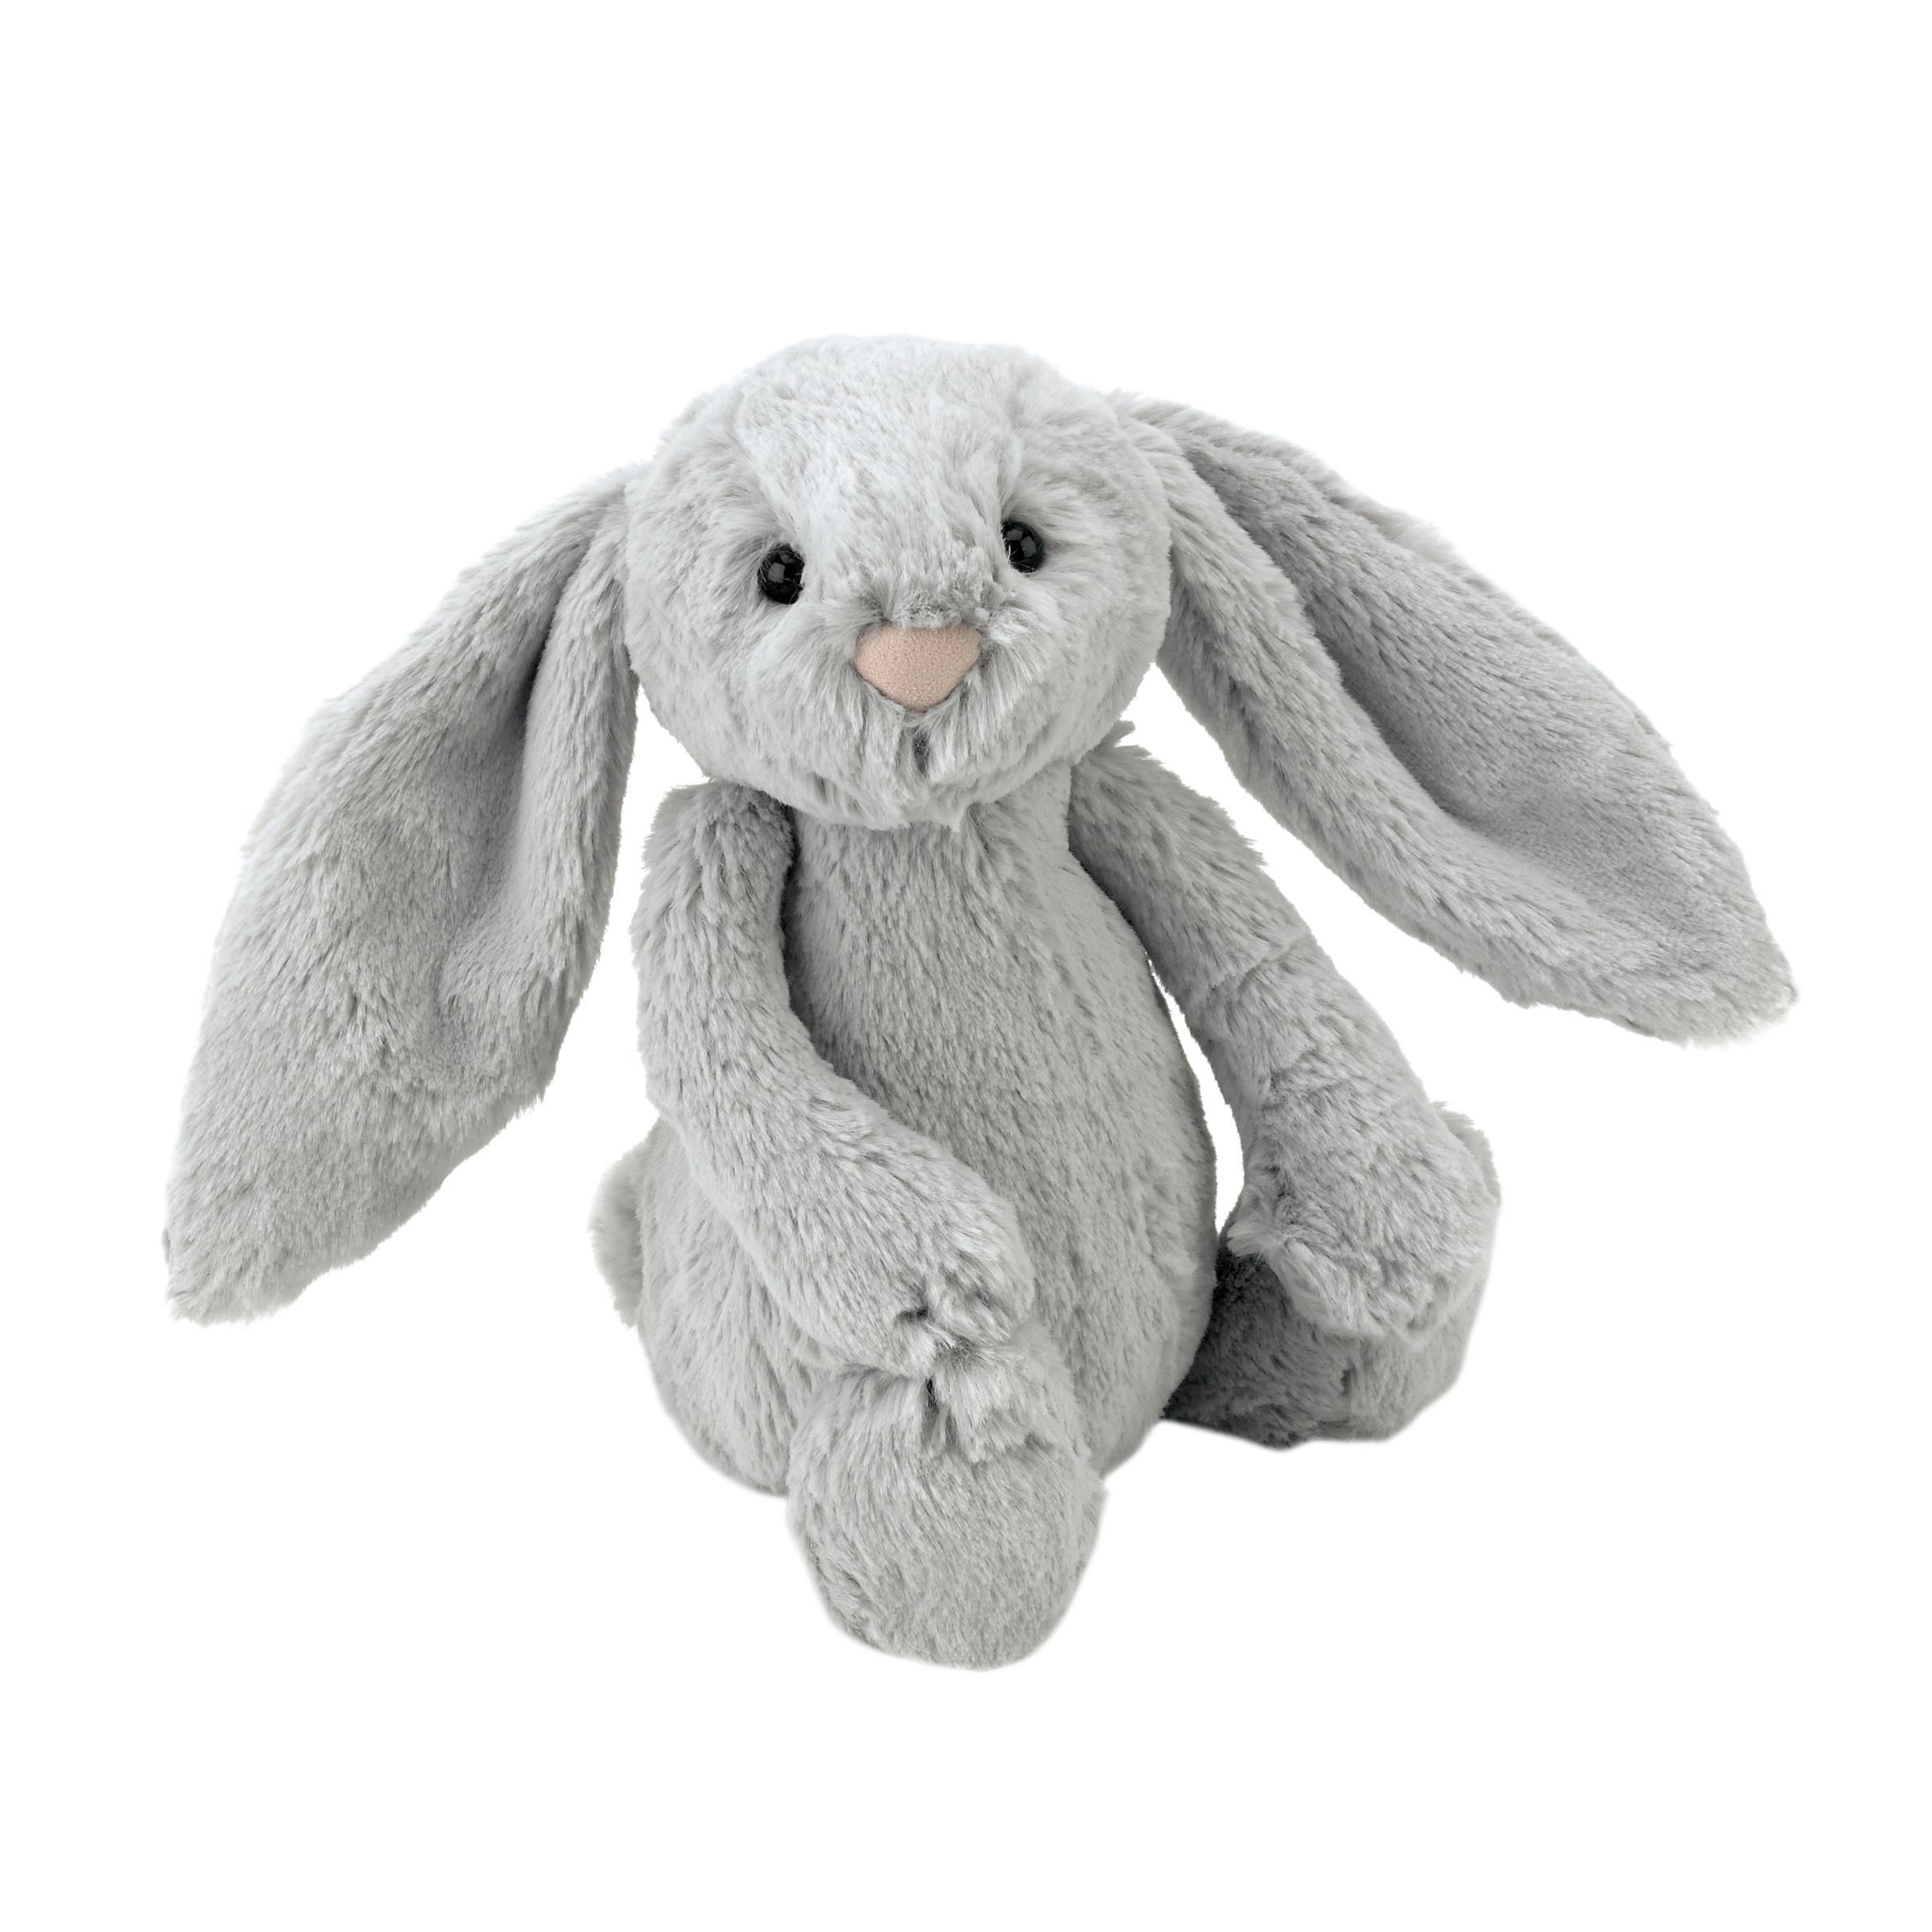 jellycat 2019 collection